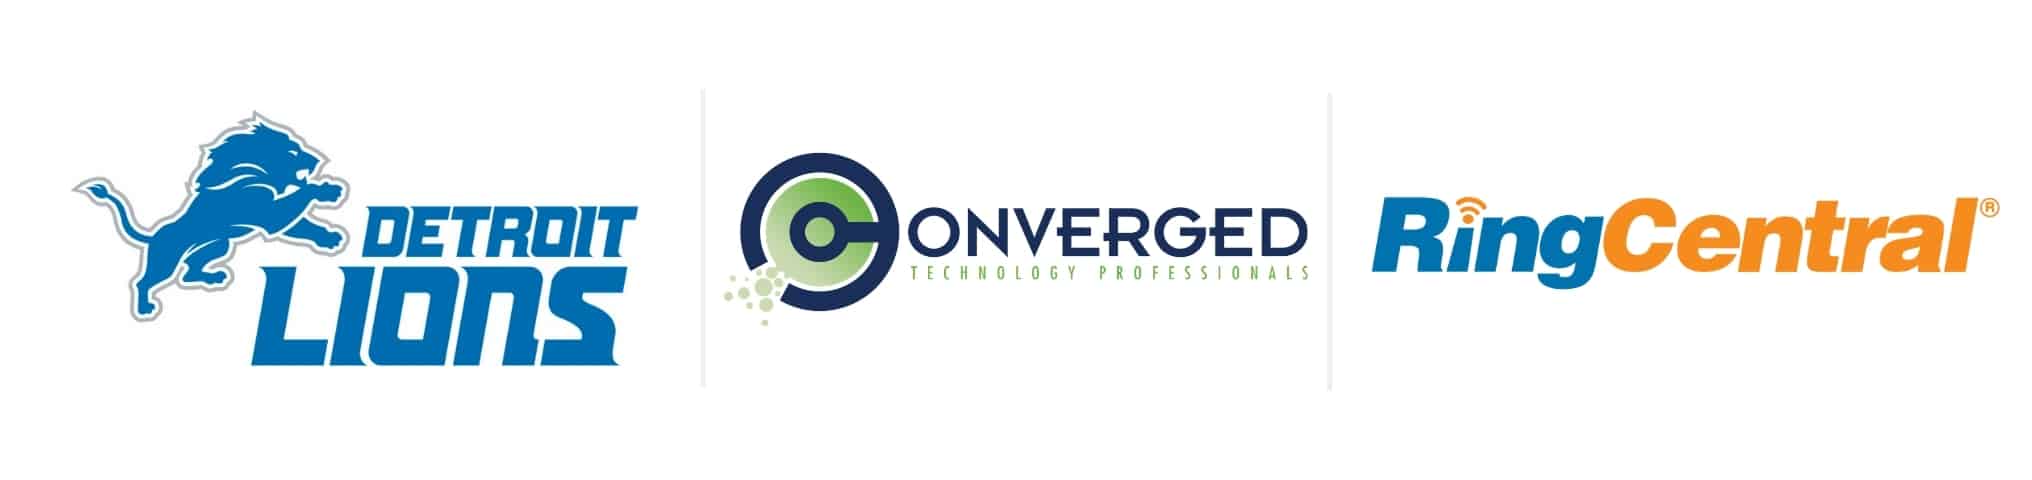 Lions | Converged | RingCentral